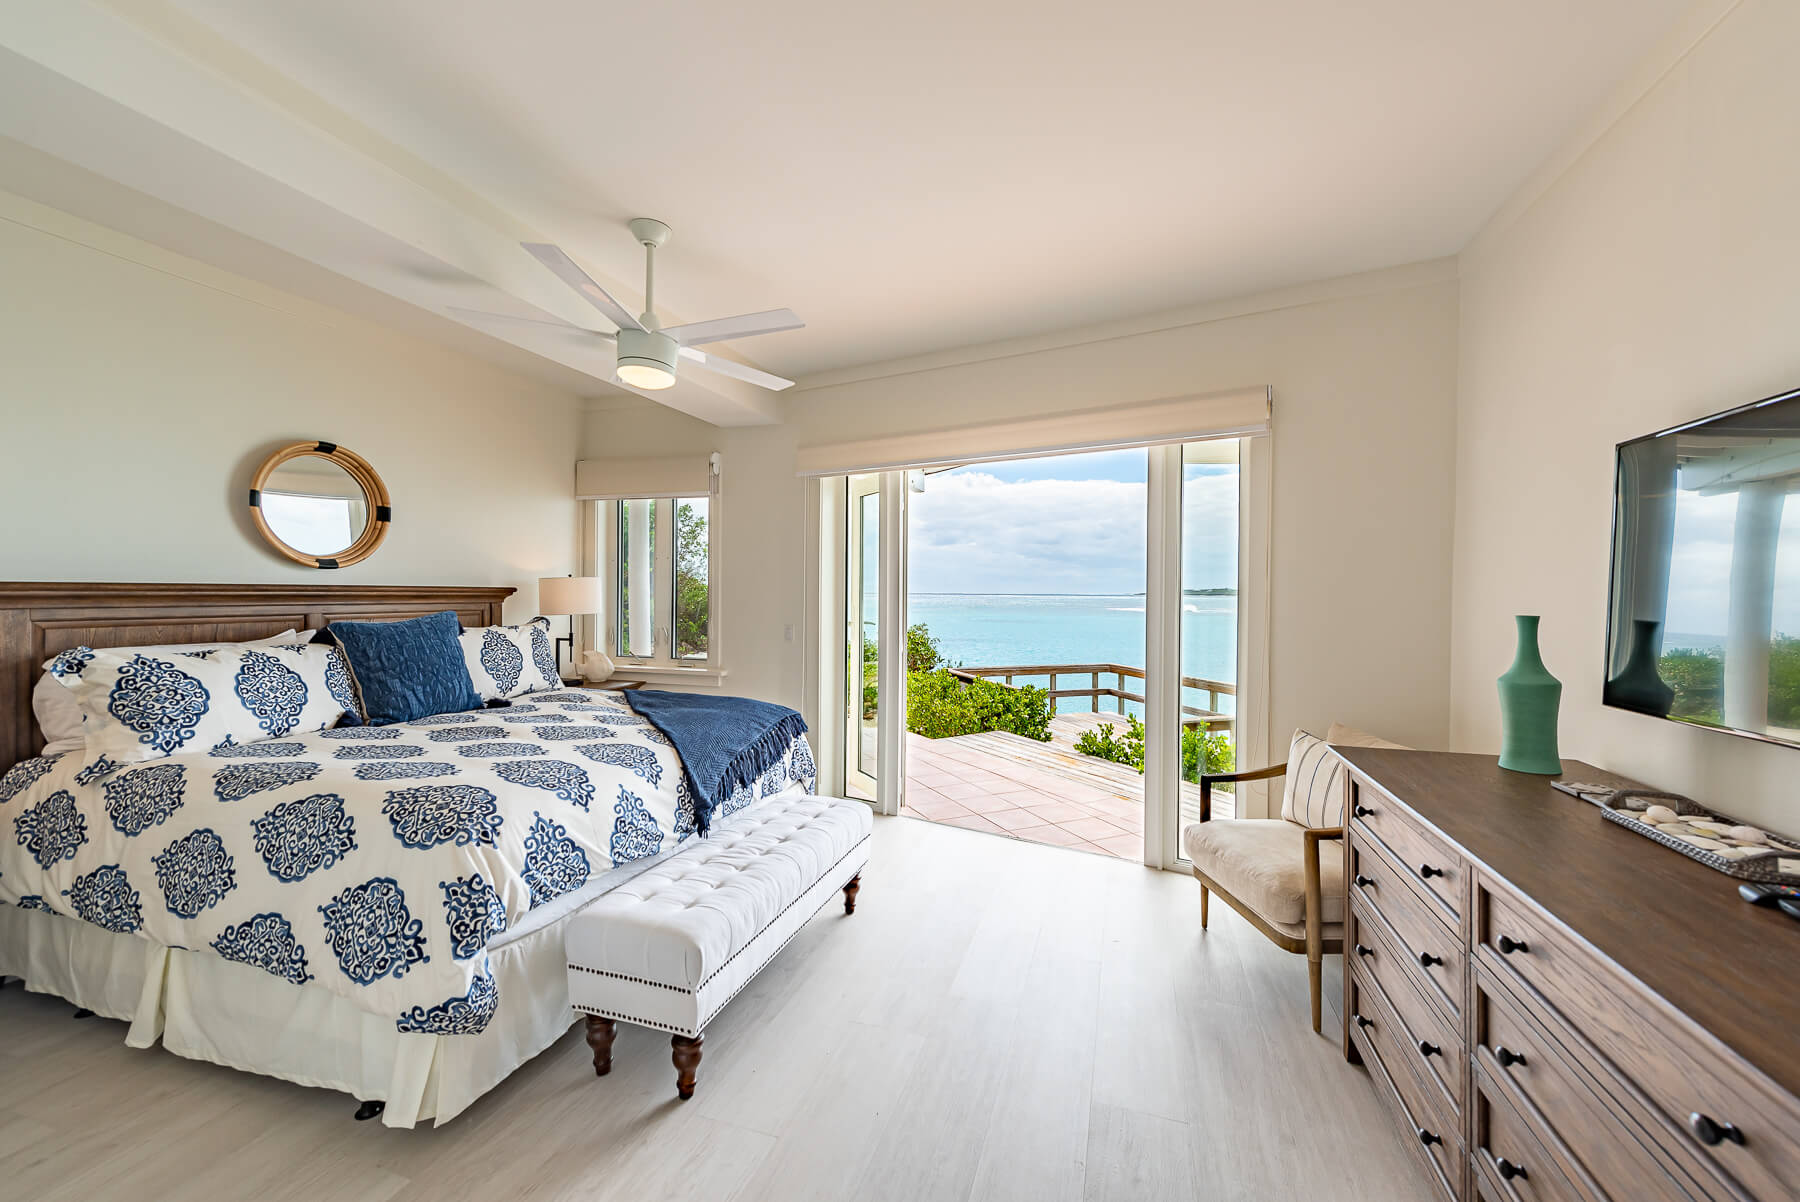 Image of a beachfront villa bedroom at The Abaco Club, showcasing peaceful coastal living in the Bahamas.